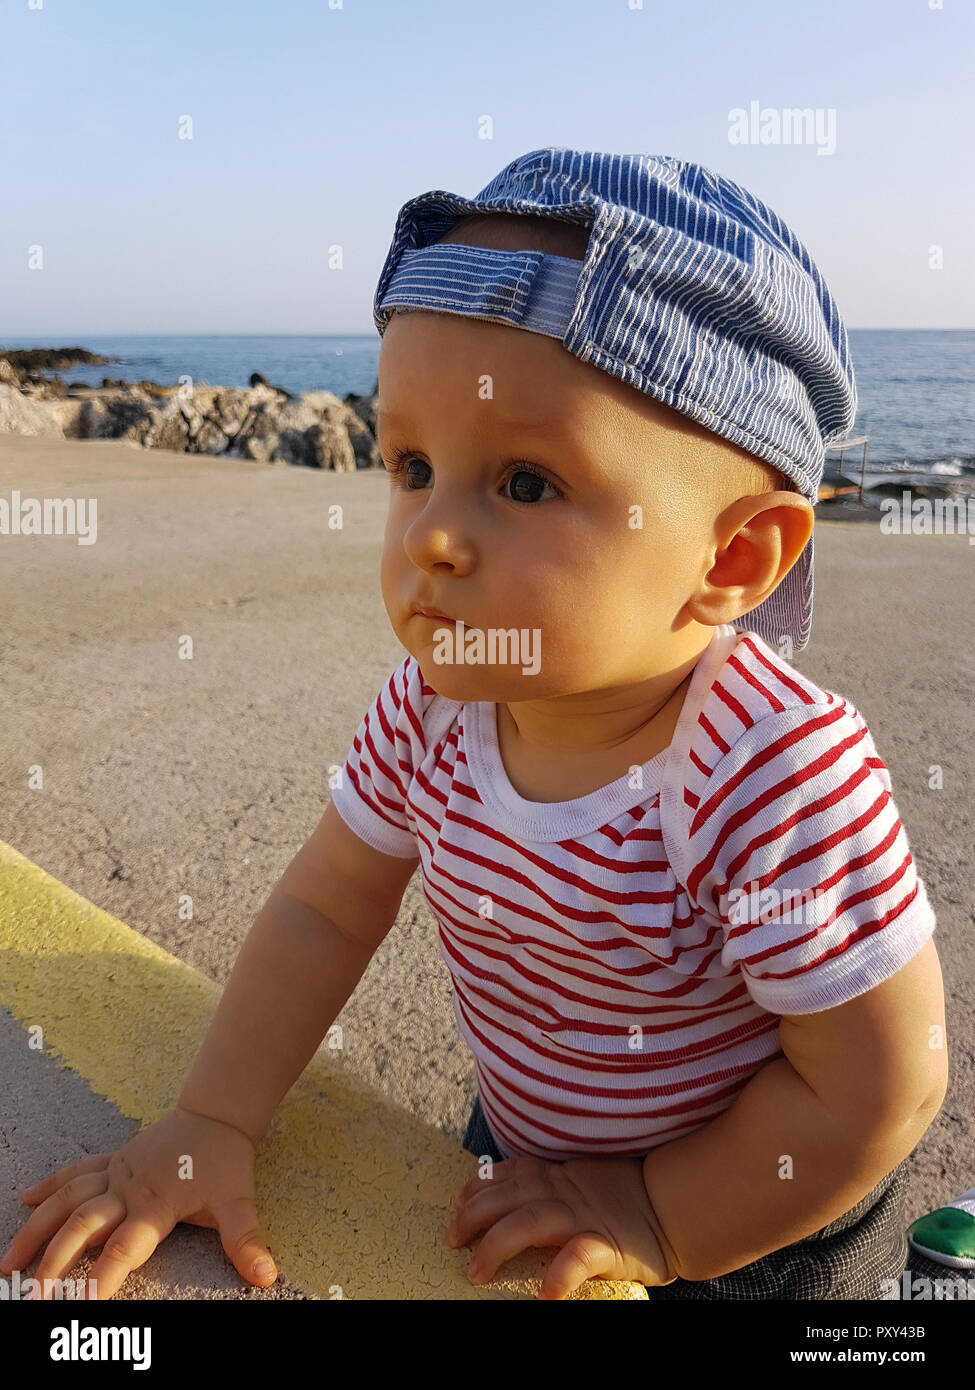 Cute Baby Boy 1 Year Wearing A Cap Backwards And Striped Clothes, Close Up Portrait. Mediterranean Sea In The Background Stock Photo